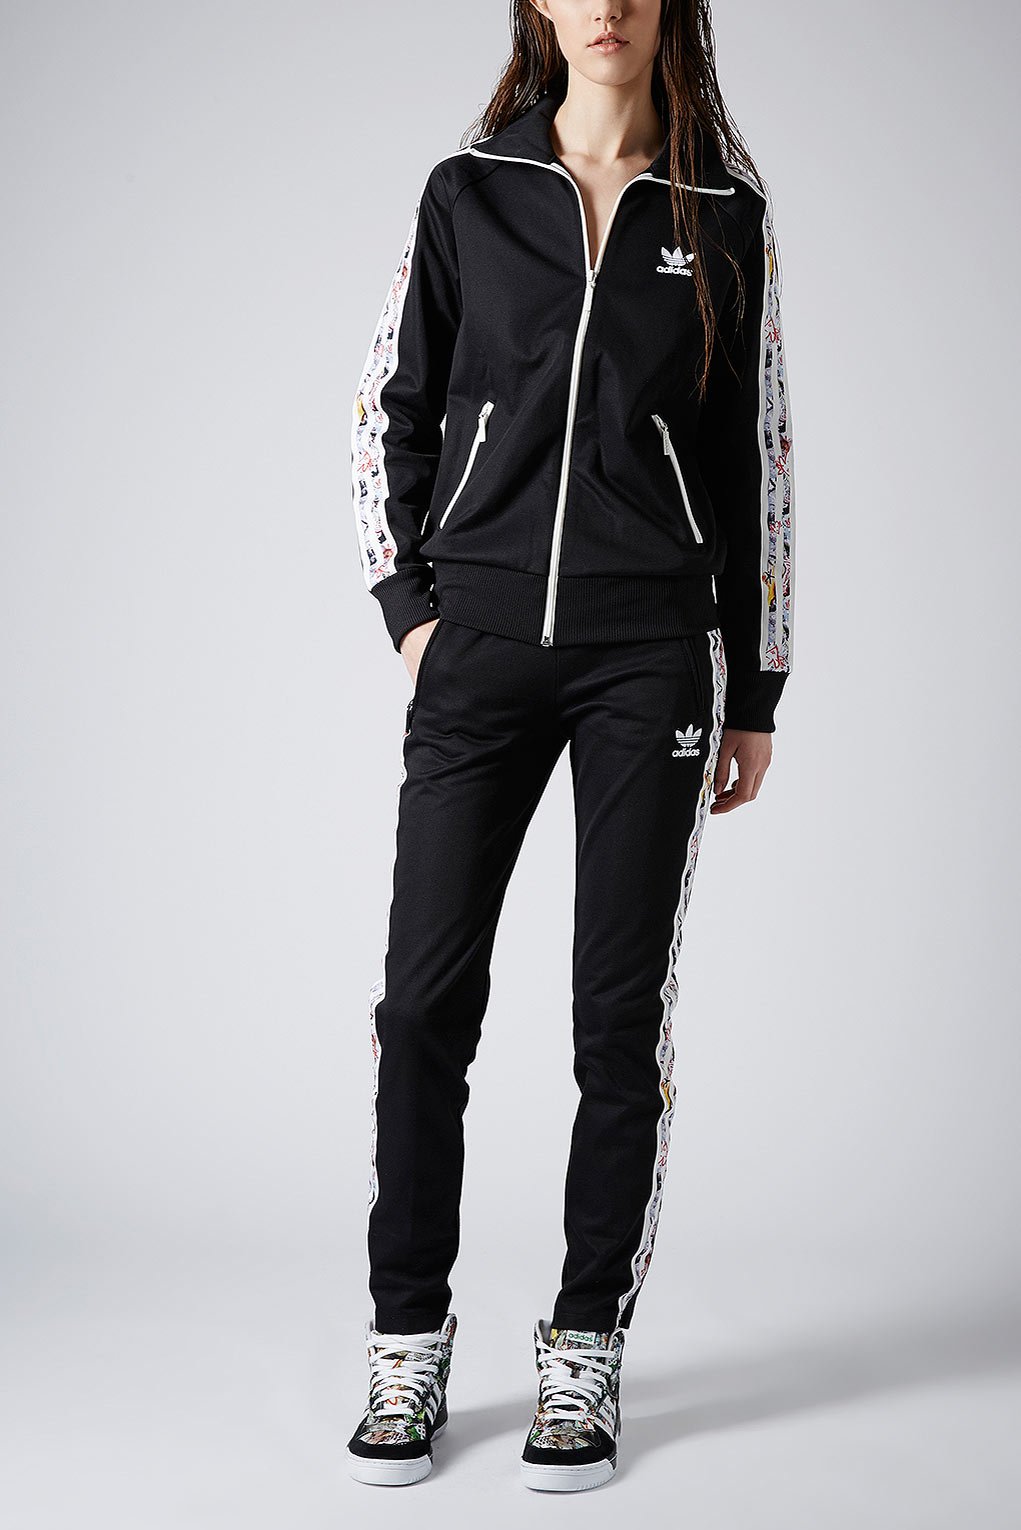 Topshop Tracksuit  Top By X Adidas  Originals  in Black Lyst